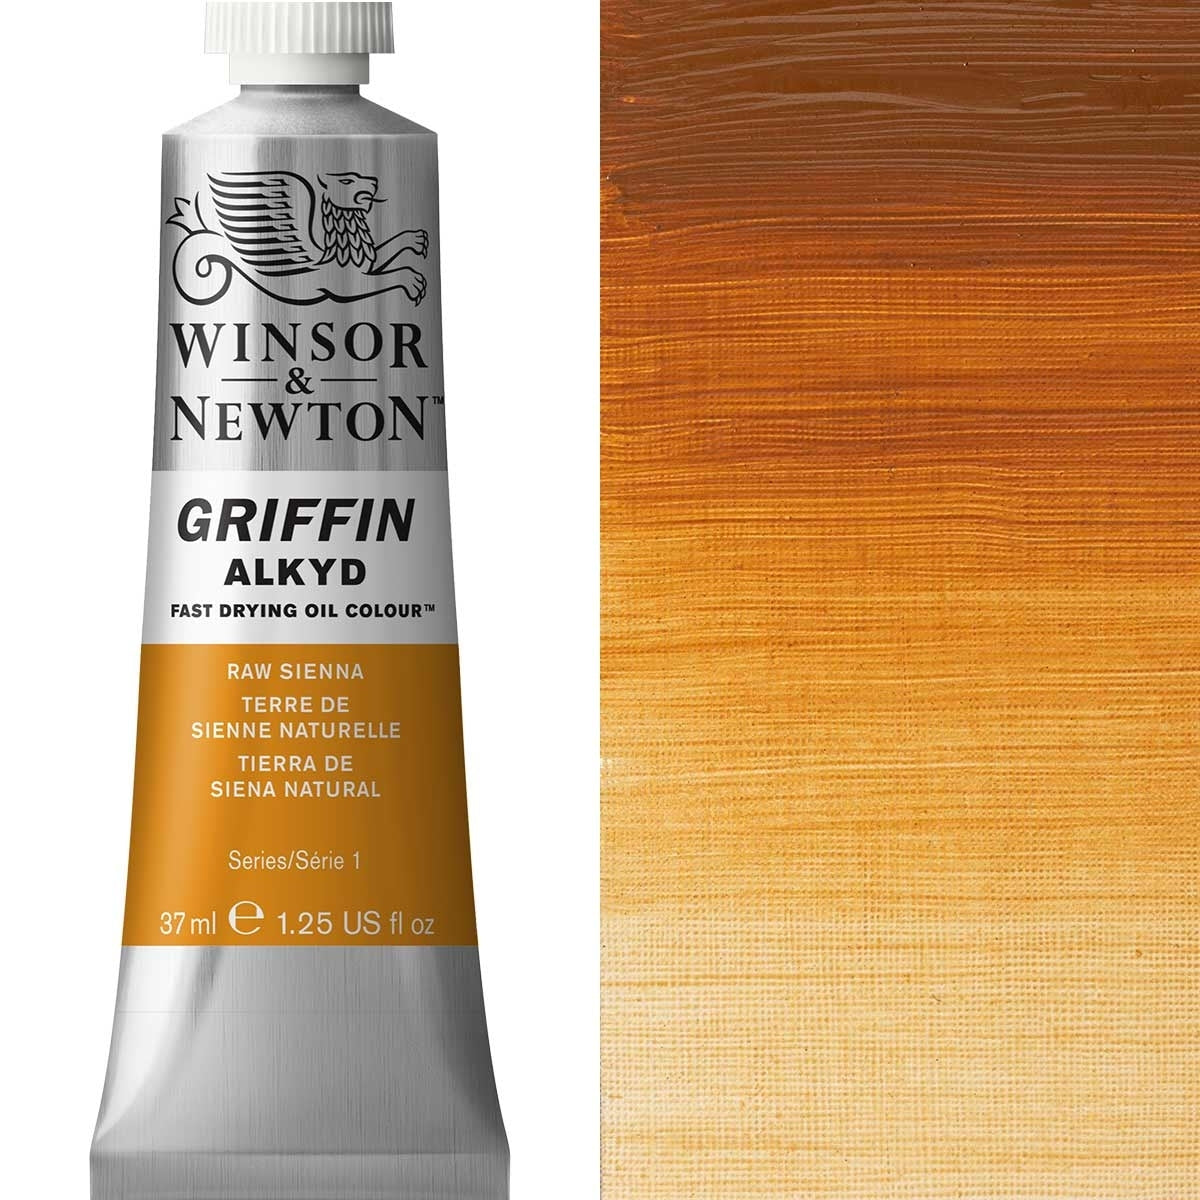 Winsor et Newton - Griffin Alkyd Oil Color - 37 ml - Sienna brute